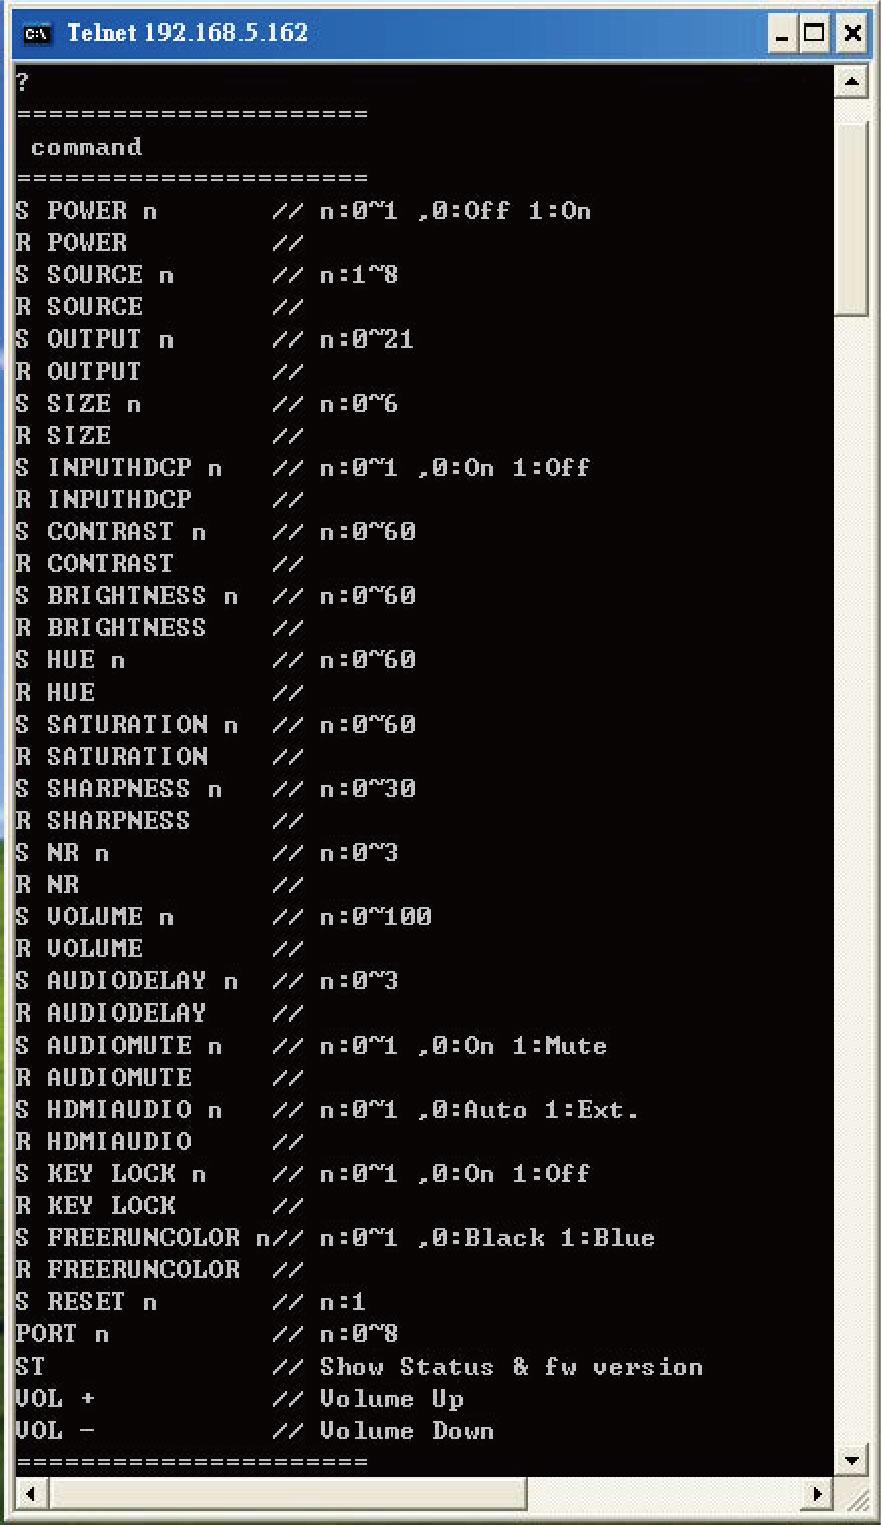 Once in the command line interface (CLI) type 'telnet' along with the IP address of the unit you wish to control (see below for reference). This will bring us into the device which we wish to control.